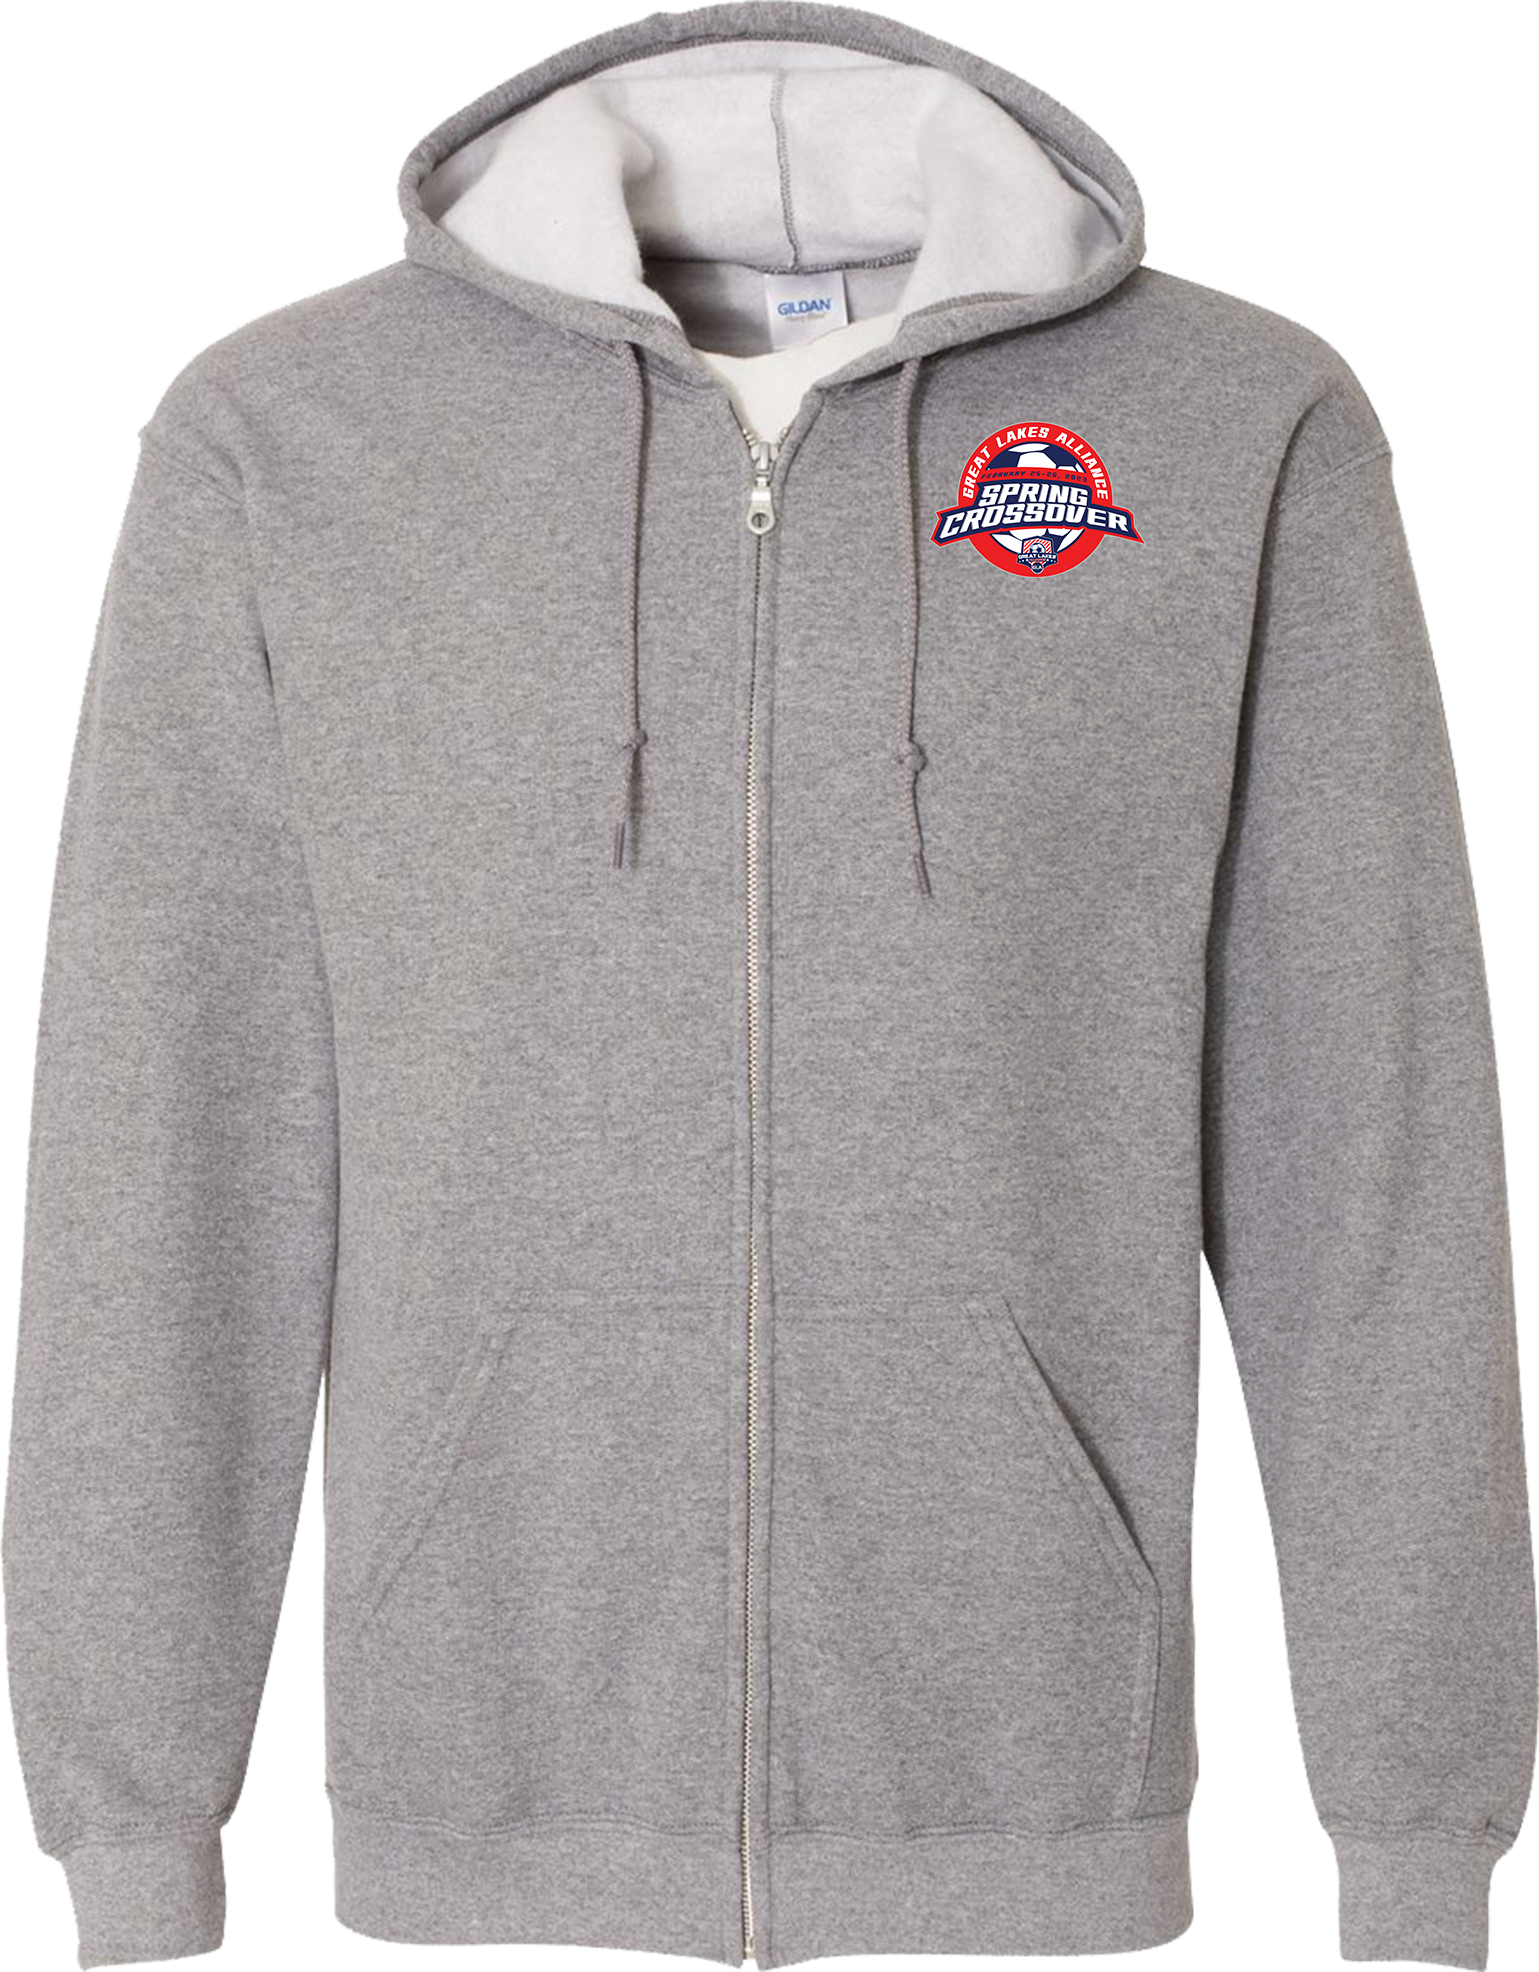 FULL ZIP HOODIES - 2023 Great Lakes Alliance Spring Crossover